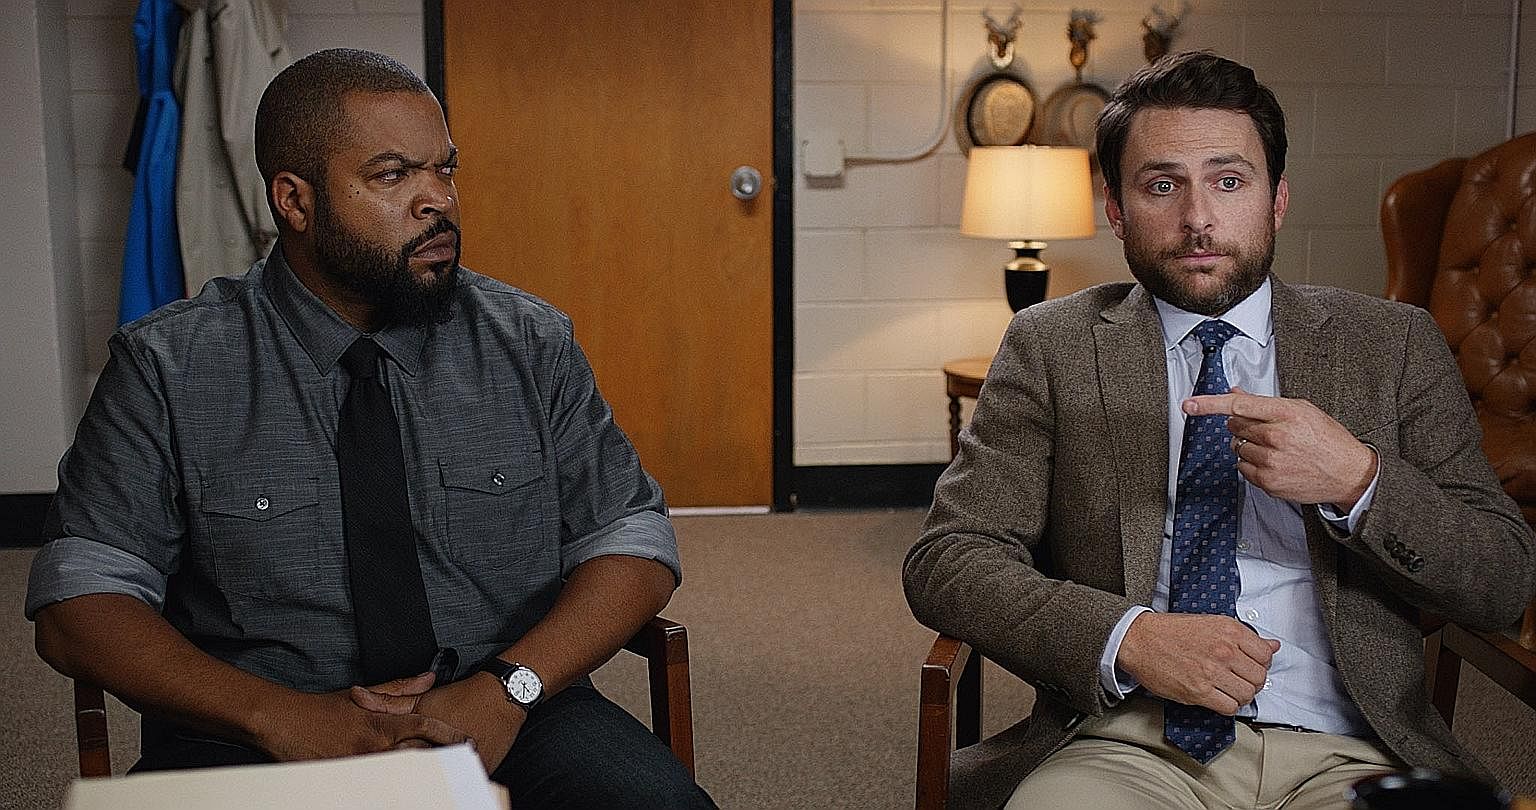 Ice Cube (left) and Charlie Day (right) are teachers locked in a feud in Fist Fight.